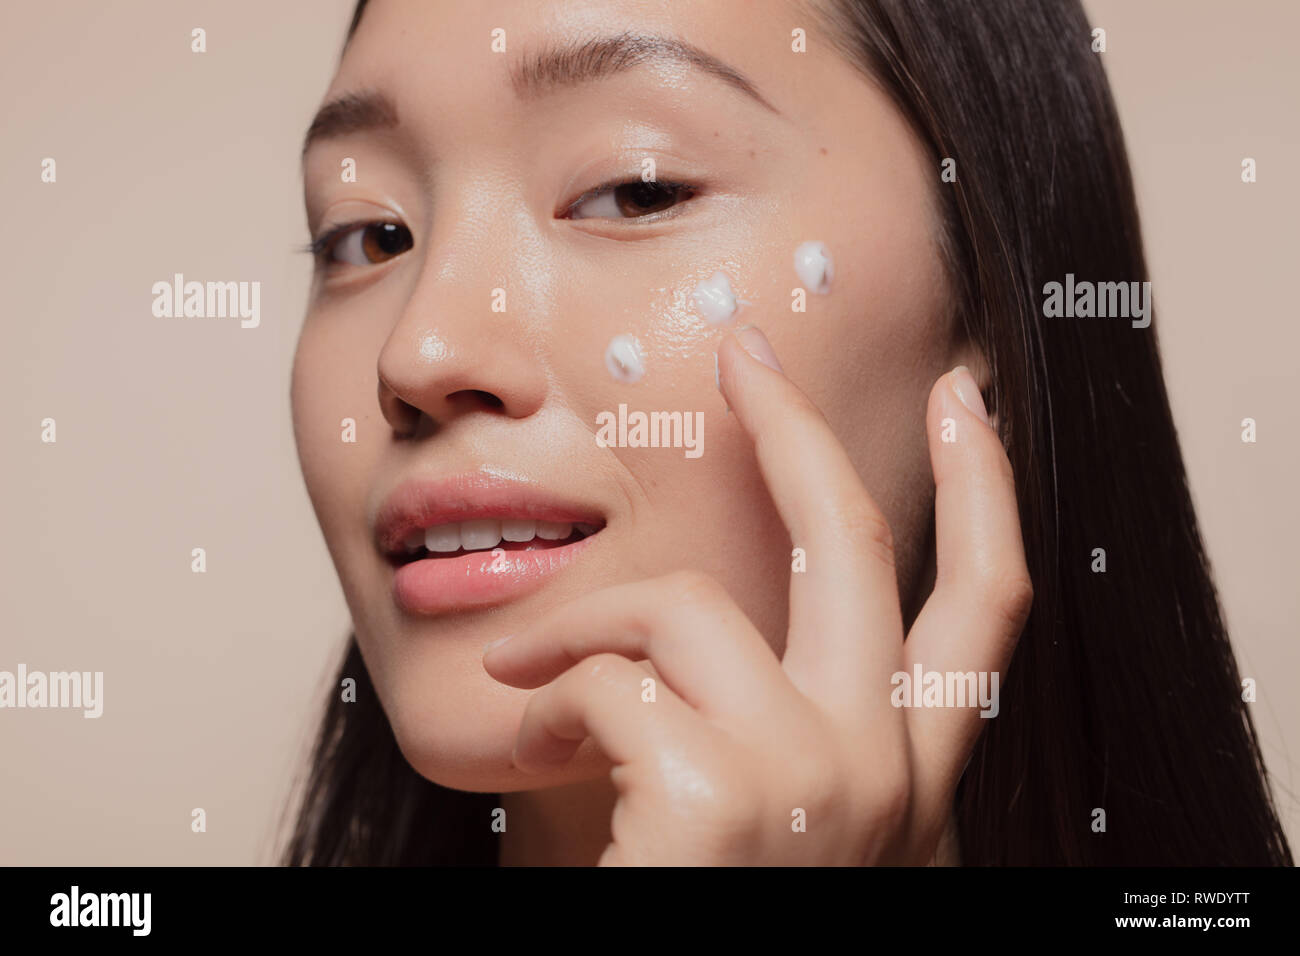 Close up of a young woman applying moisturizer to her face. Asian woman looking happy while following skincare regime. Stock Photo